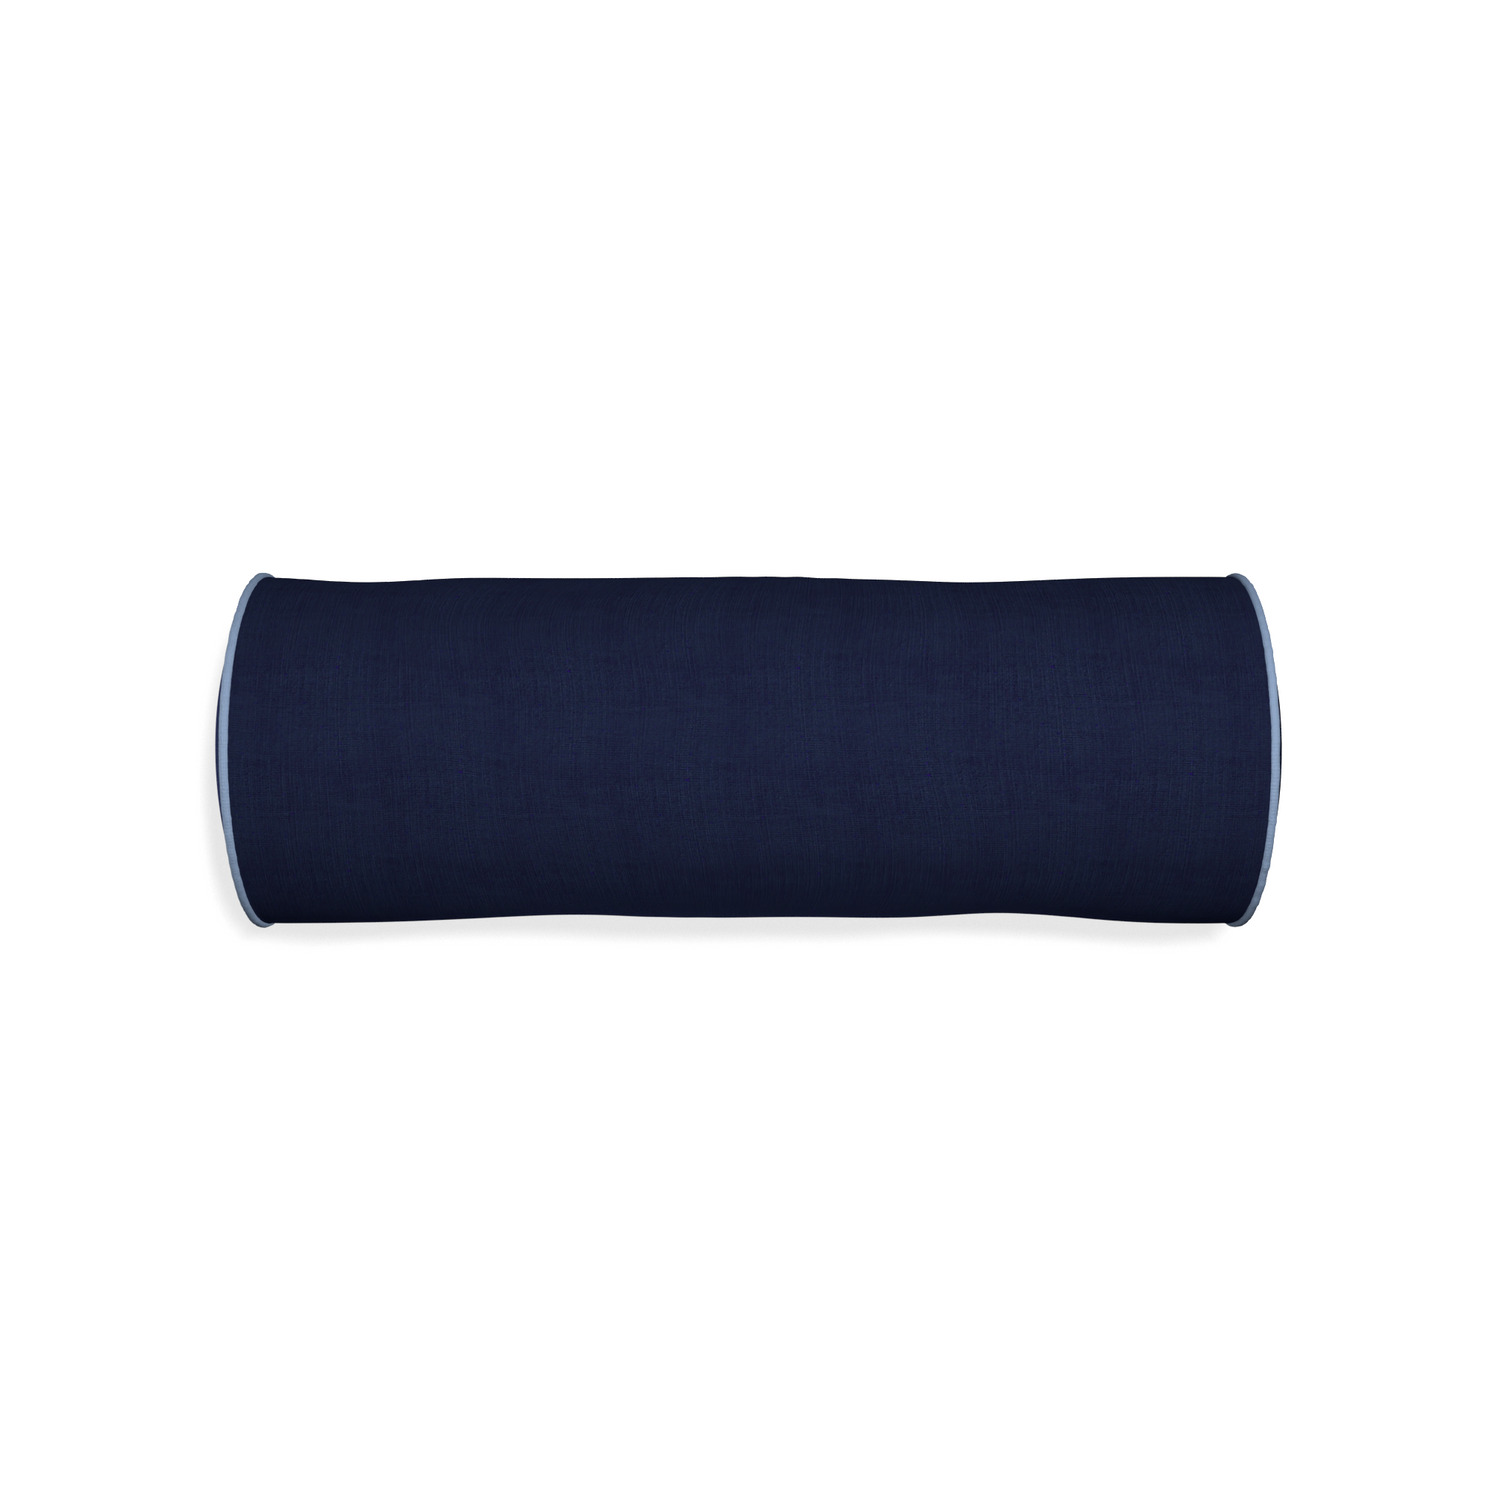 Bolster midnight custom navy bluepillow with sky piping on white background